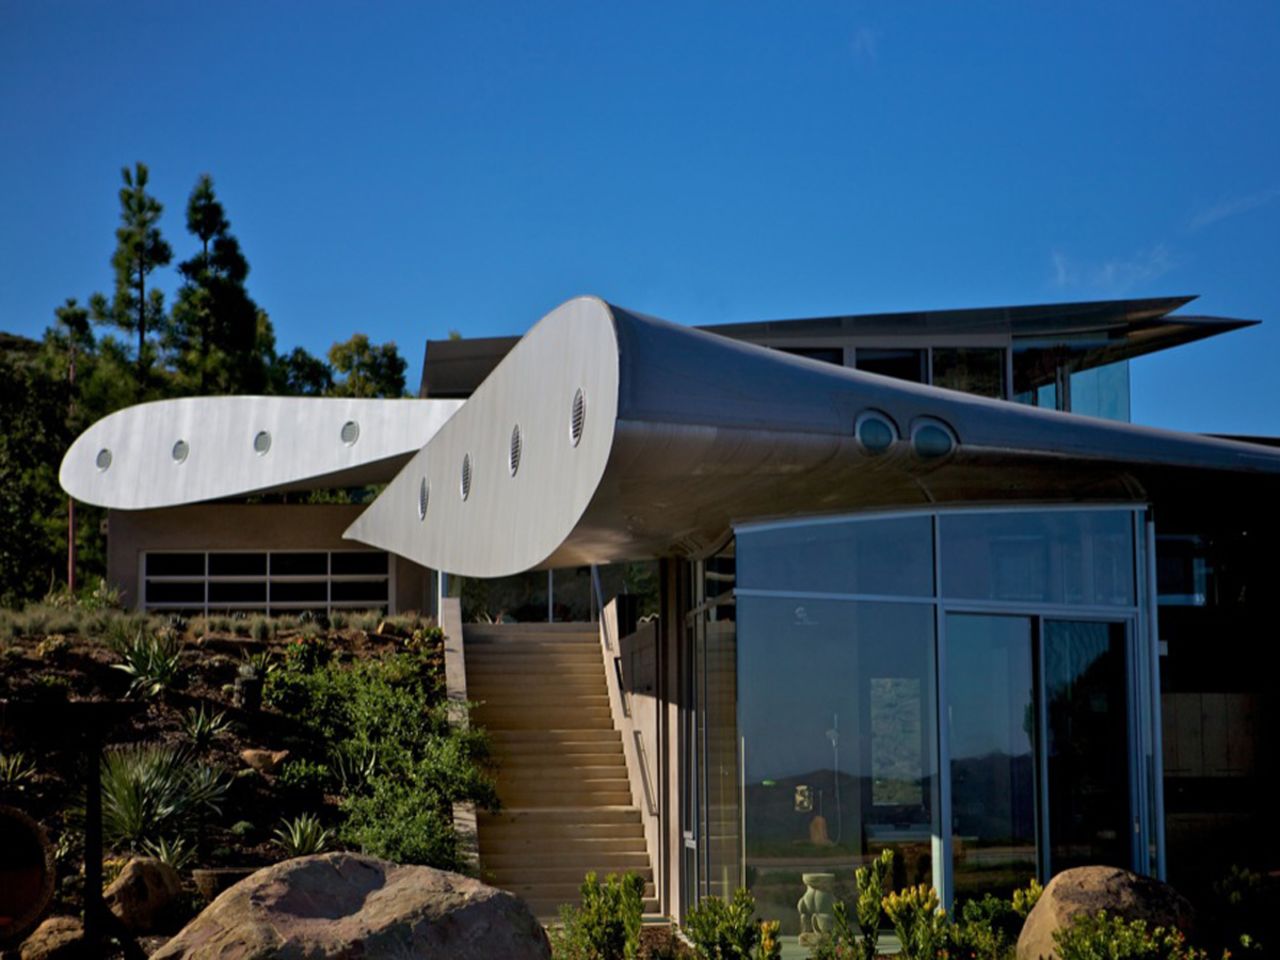 Architect David Hertz designed this Wing House in Malibu from the wing of a Boeing 747 for a client who requested "curvilinear, feminine shapes." While the roof looks durable, we're wondering what it sounds like when it rains. 